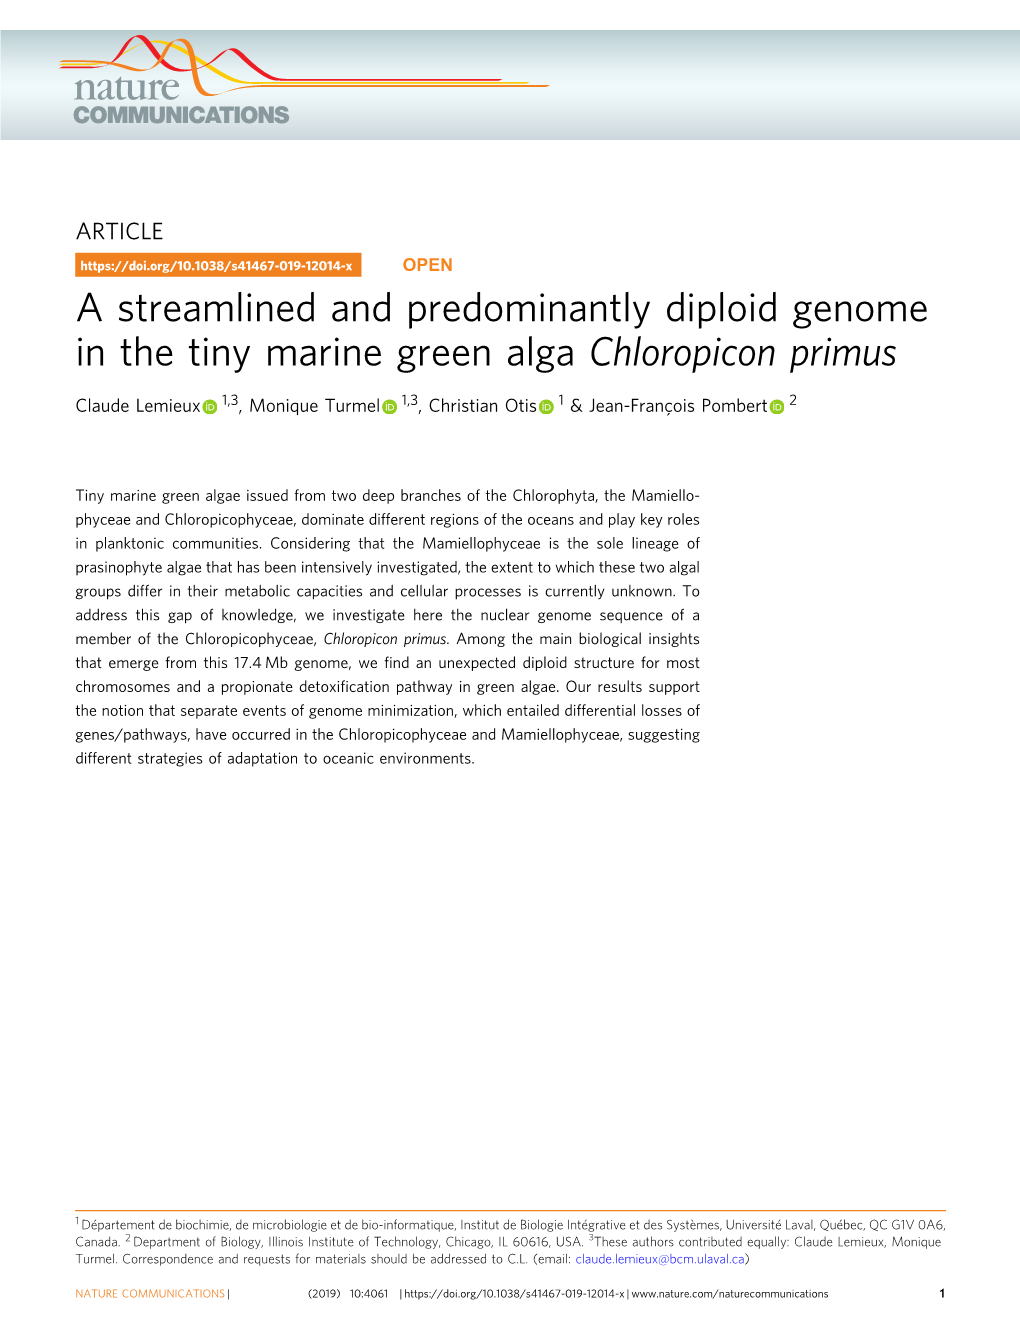 A Streamlined and Predominantly Diploid Genome in the Tiny Marine Green Alga Chloropicon Primus